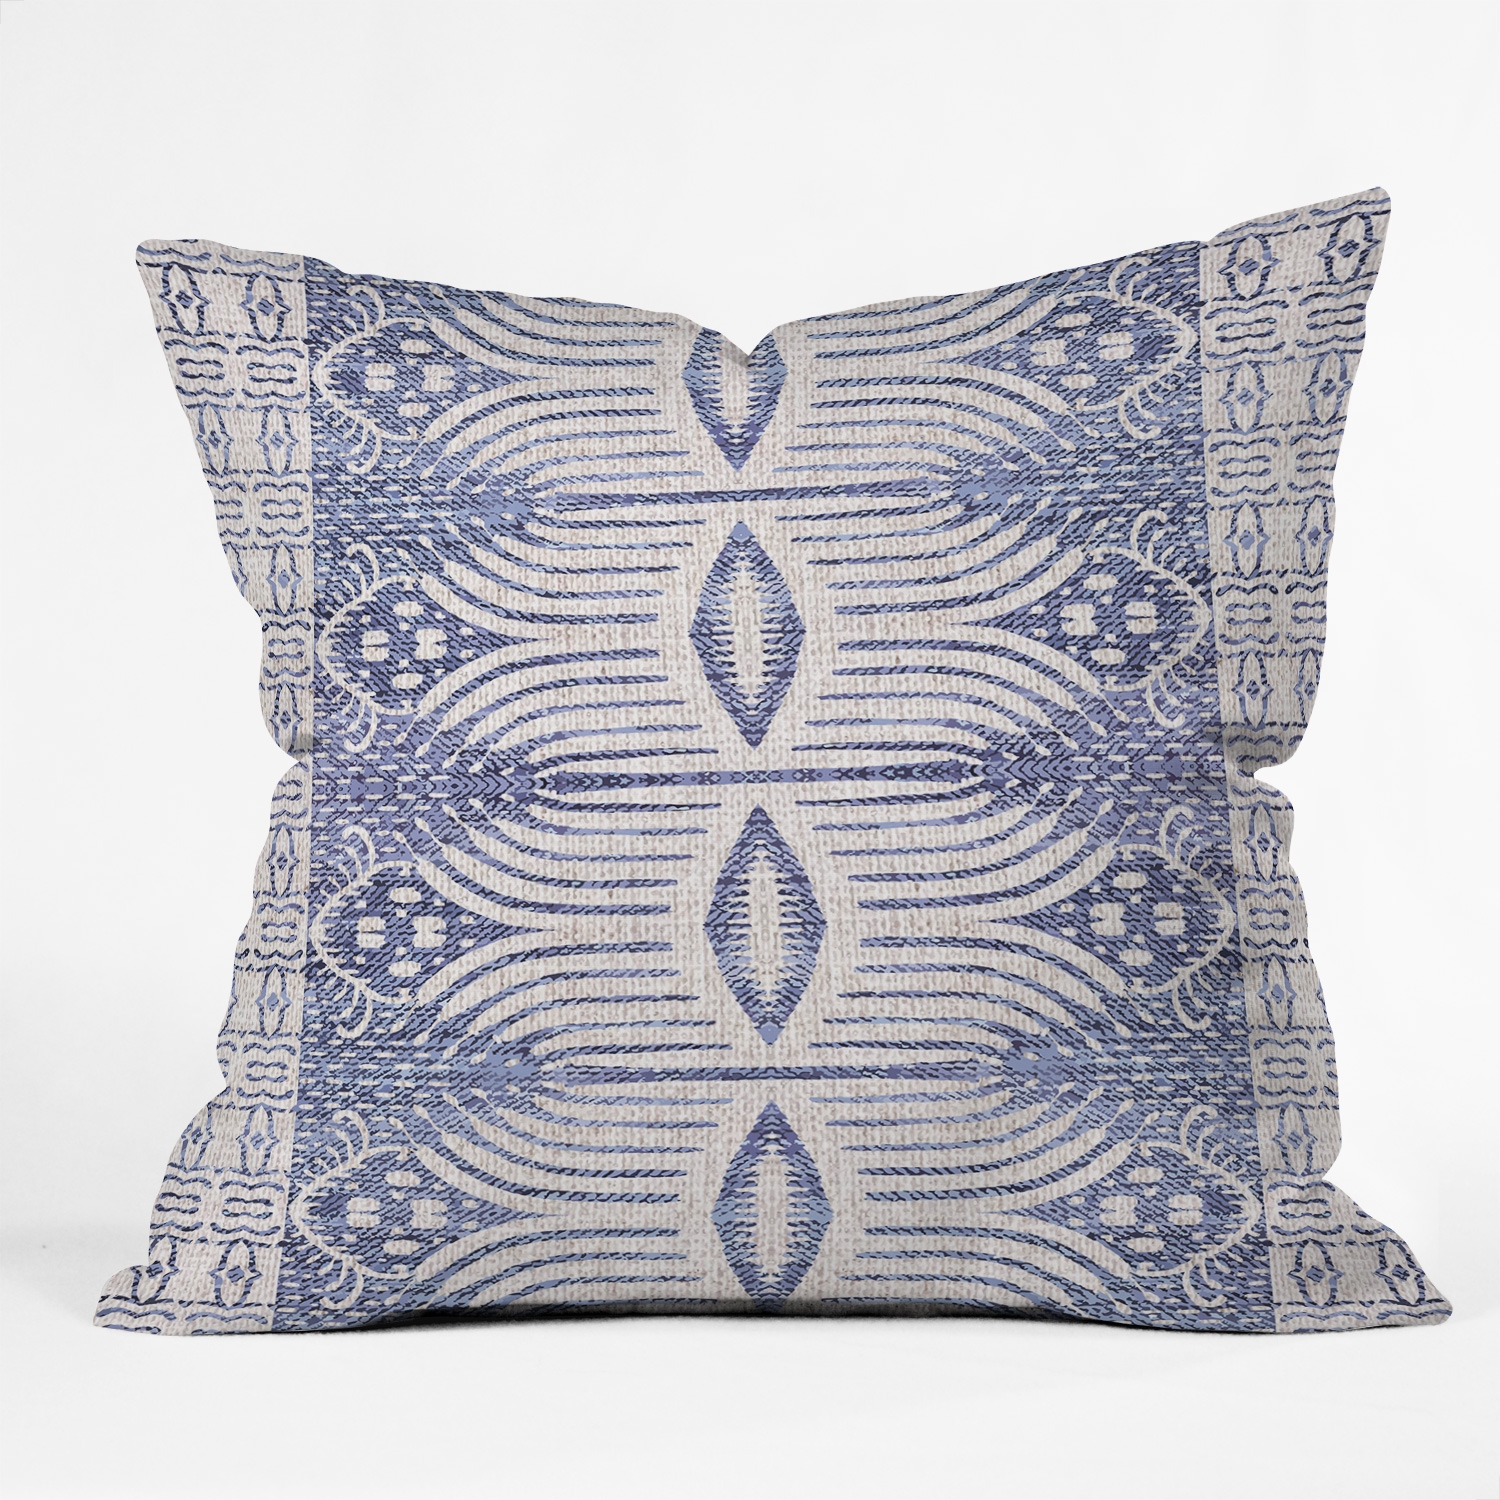 French Linen Tribal Ikat by Holli Zollinger - Outdoor Throw Pillow 16" x 16" - Image 1